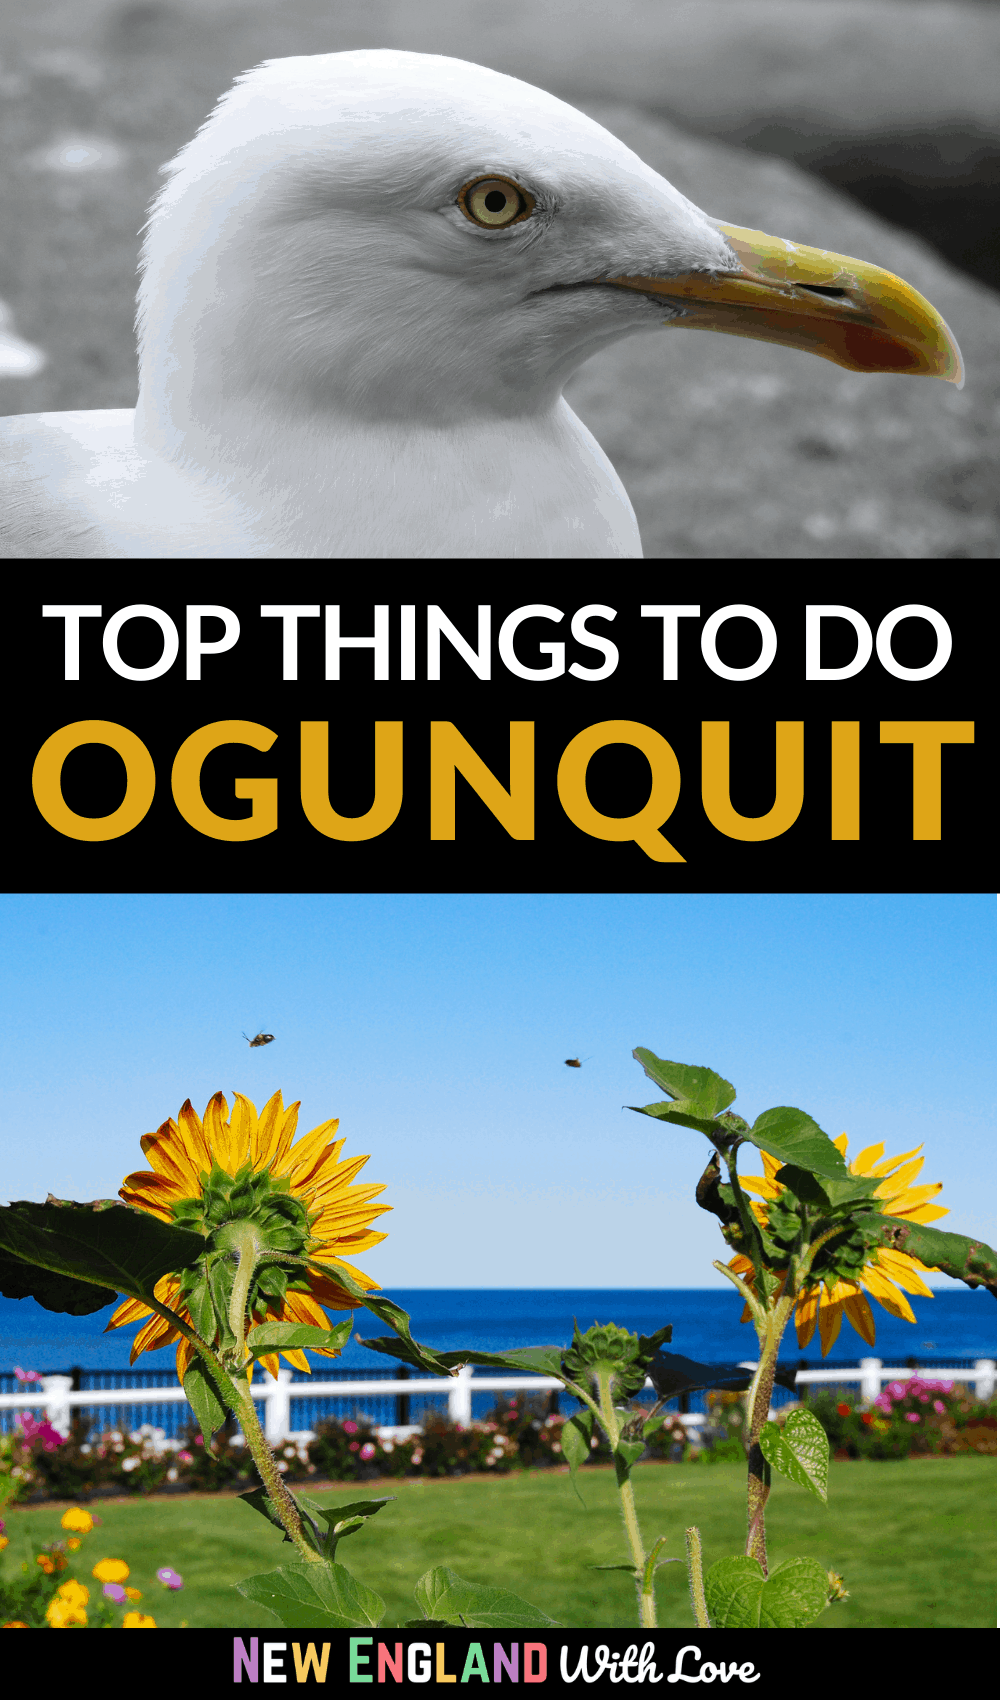 Pinterest graphic reading "TOP THINGS TO DO OGUNQUIT"